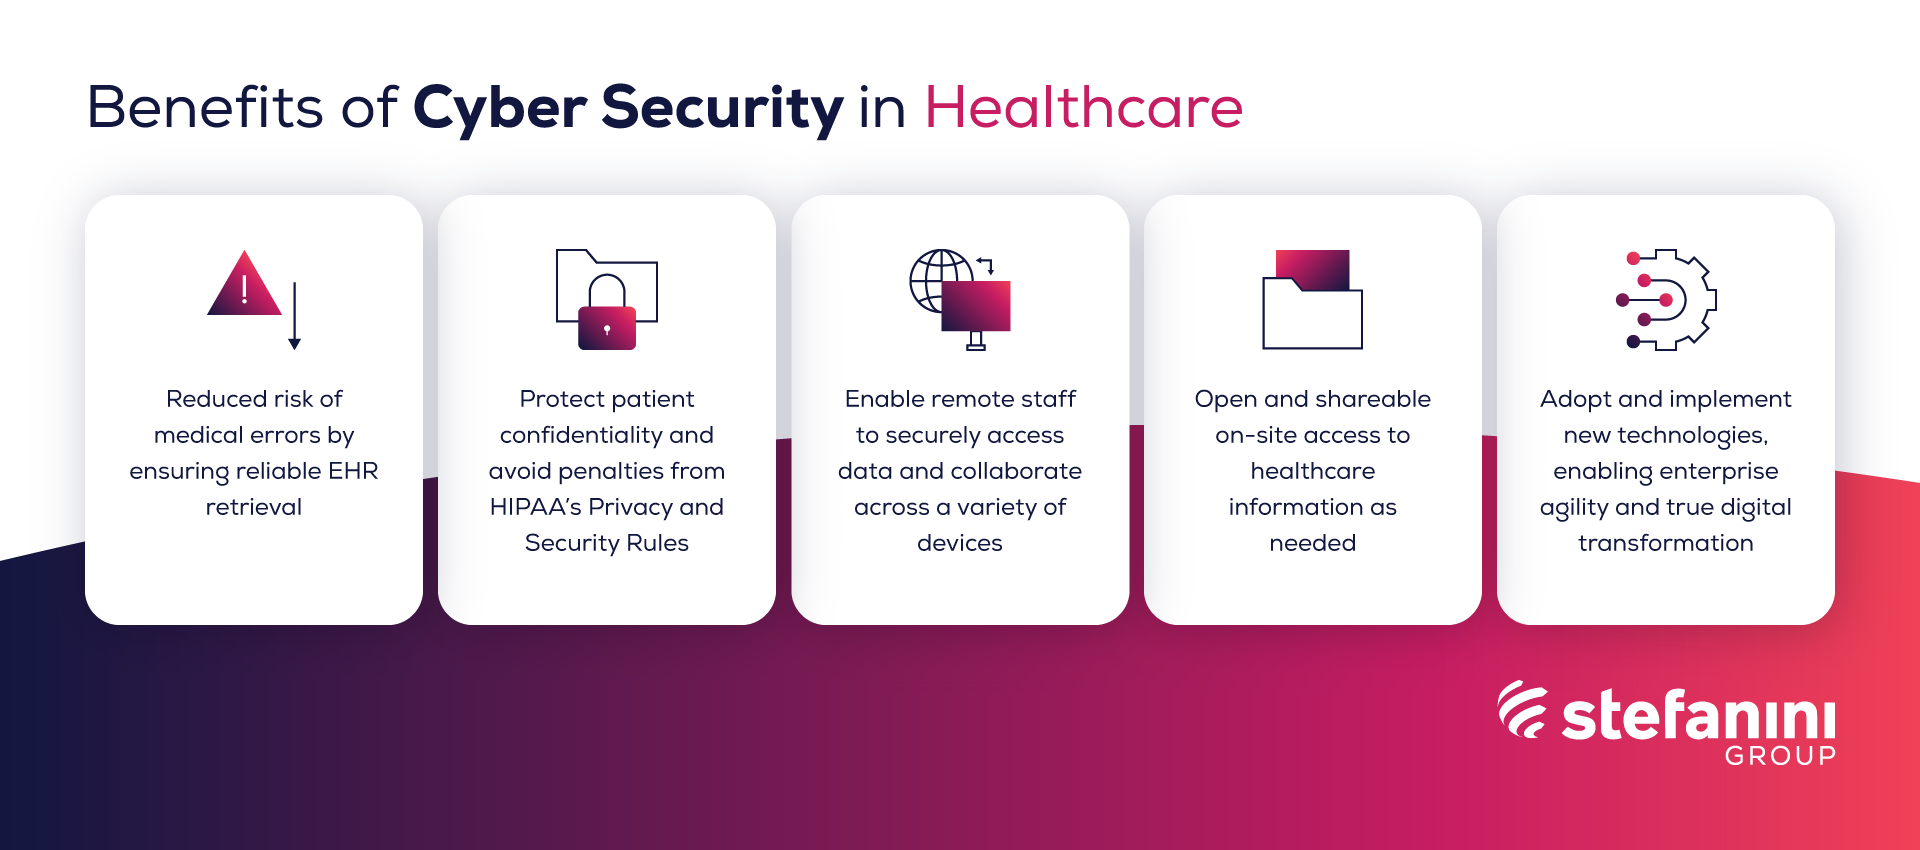 Benefits of Cyber Security in Healthcare